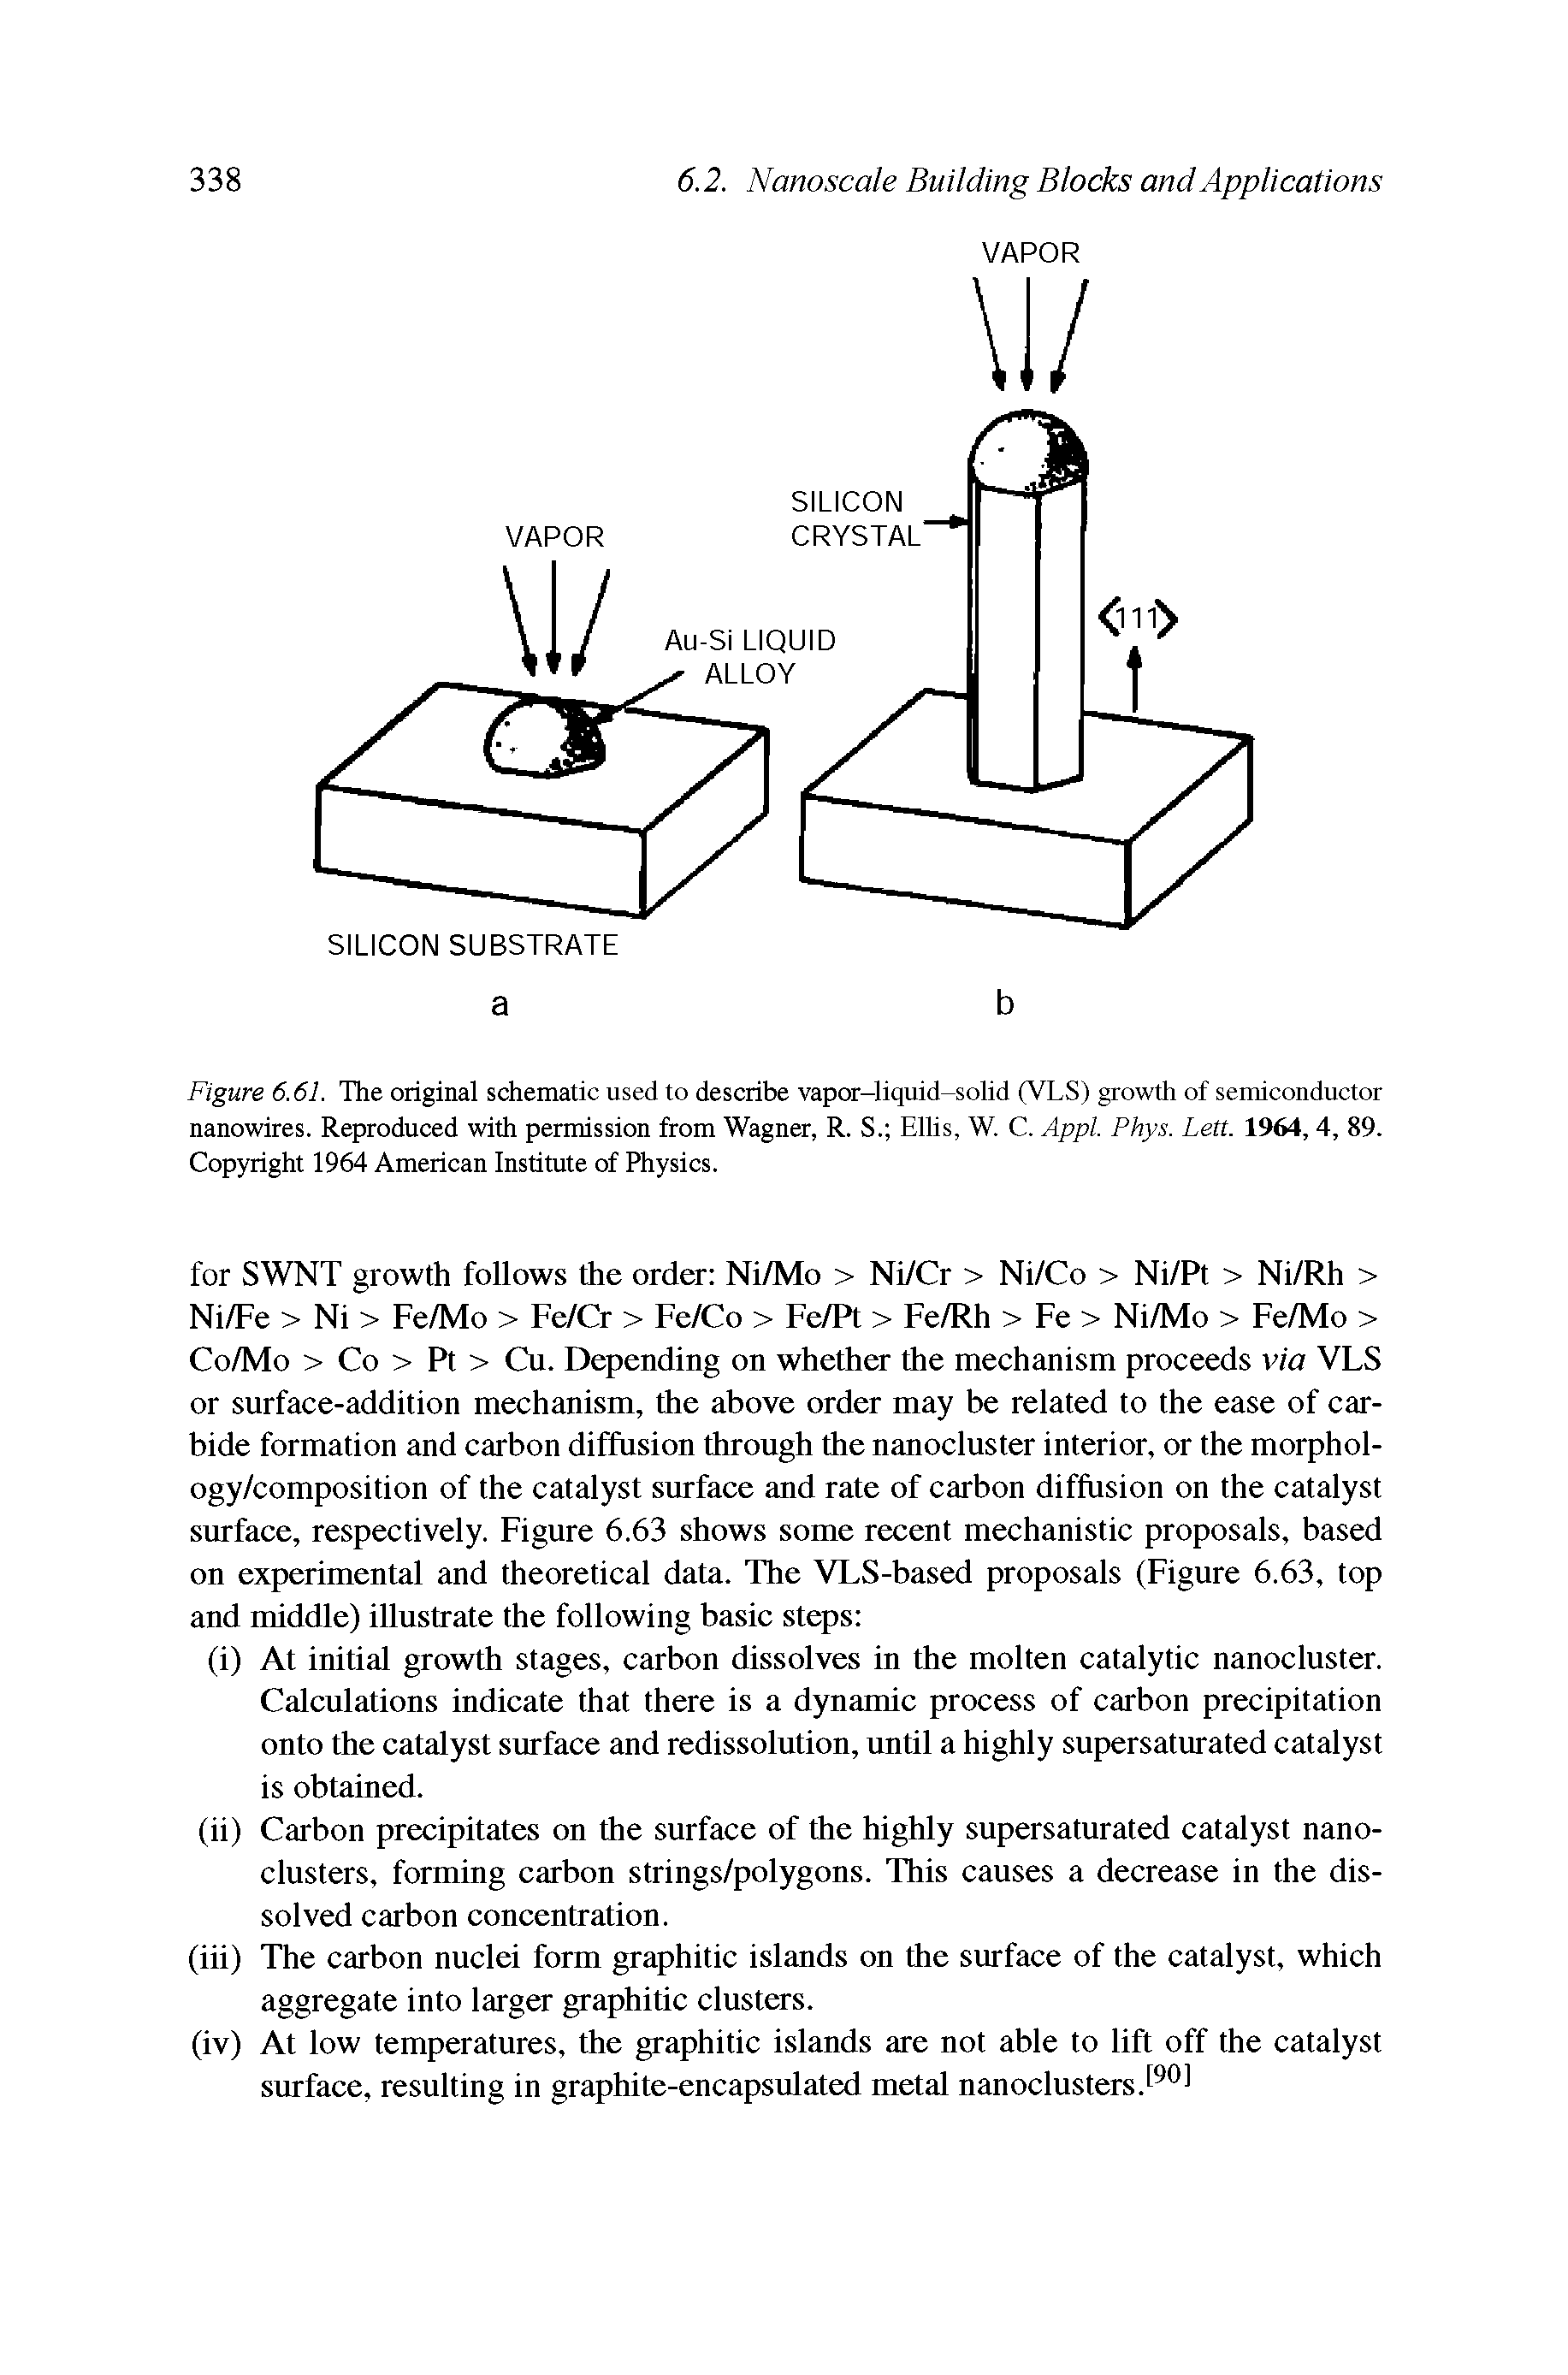 Figure 6.61. The original schematic used to describe vapor-liquid-solid (VLS) growth of semiconductor nanowires. Reproduced with permission from Wagner, R. S. Ellis, W. C. Appl. Phys. Lett. 1964, 4, 89. Copyright 1964 American Institute of Physics.